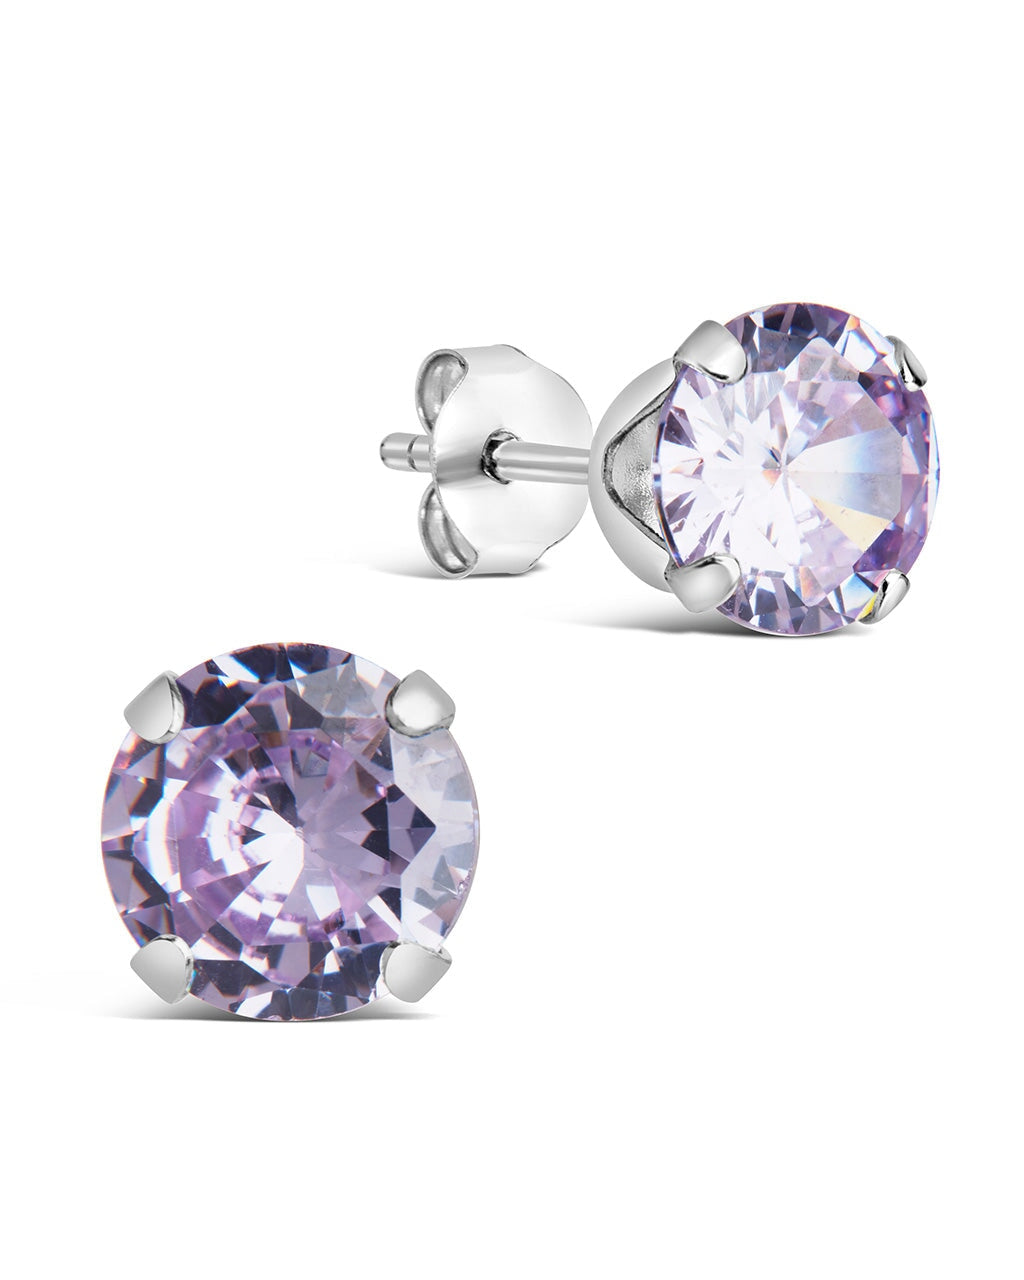 Buy the Rainbow Moonstone and Pave Diamond Earrings at our Online Store –  Diana Vincent Jewelry Designs